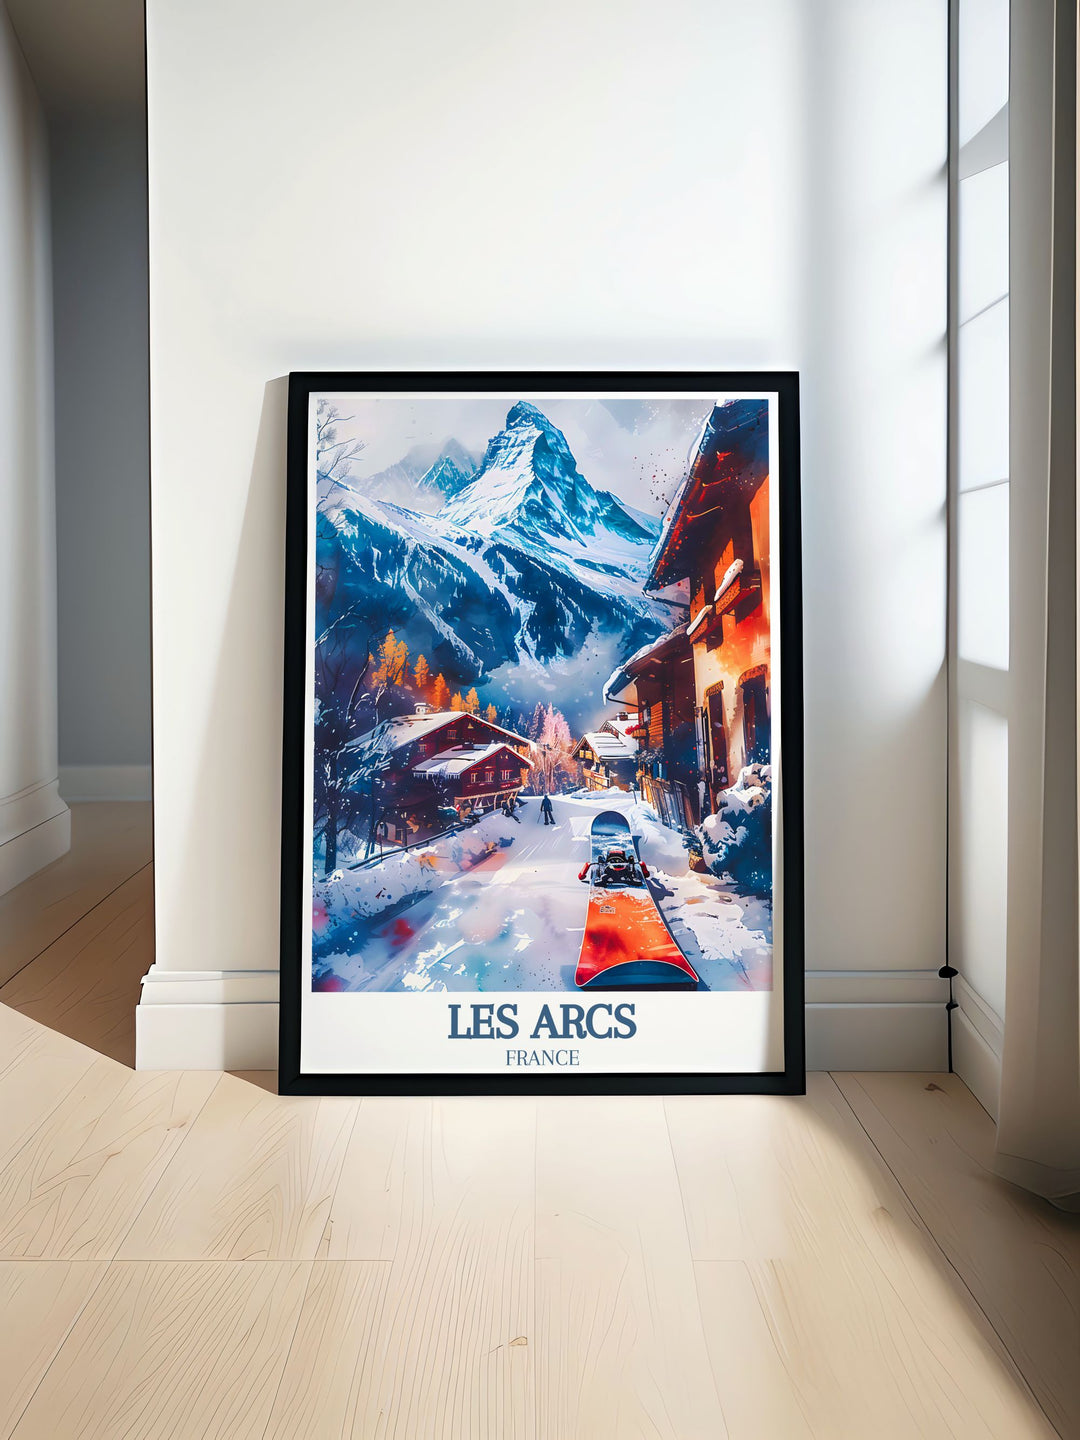 Snowboarding Poster featuring vibrant scenes from Paradiski ski area Les Arcs Ski resort Mont Blanc capturing the thrill of winter sports perfect for adding adventure to your home decor and snowboarding art collection